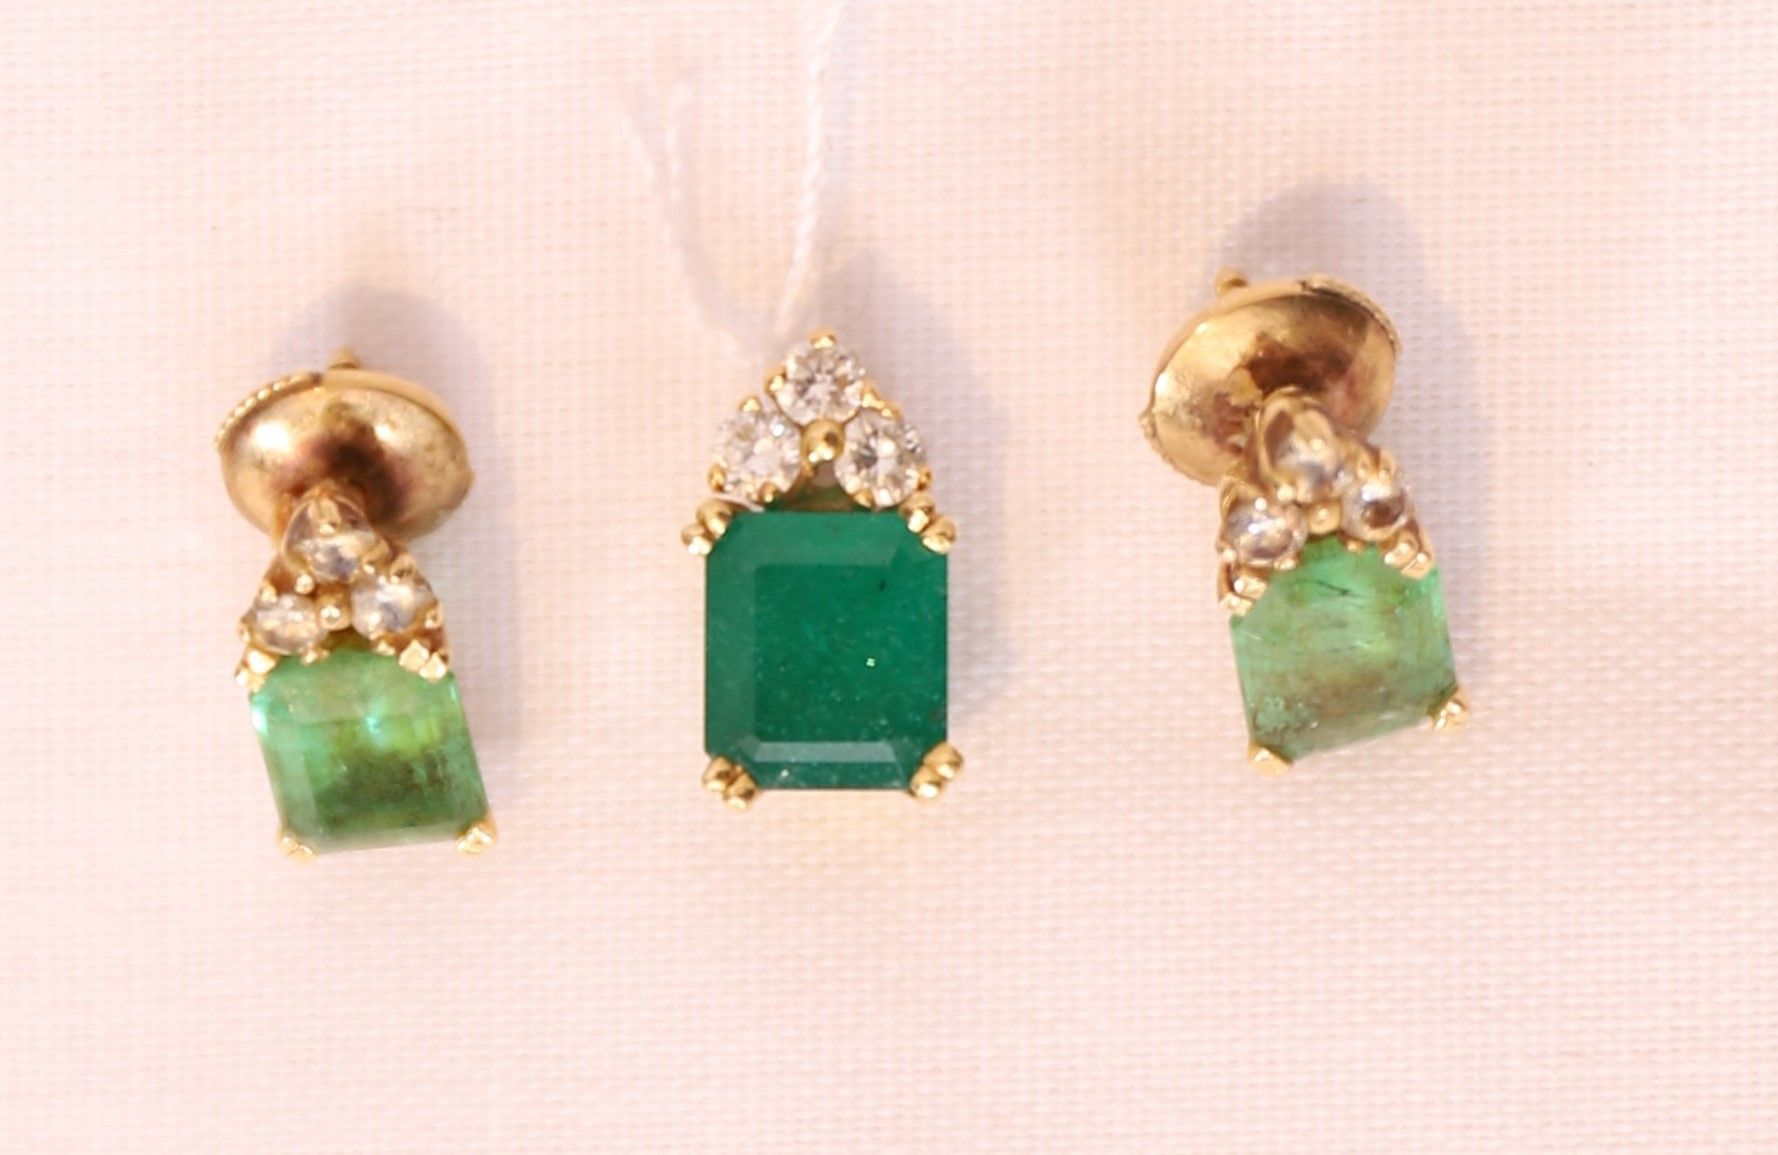 Null SET INCLUDING A PENDANT AND A PAIR OF EARRINGS WITH EMERALDS

Yellow gold m&hellip;